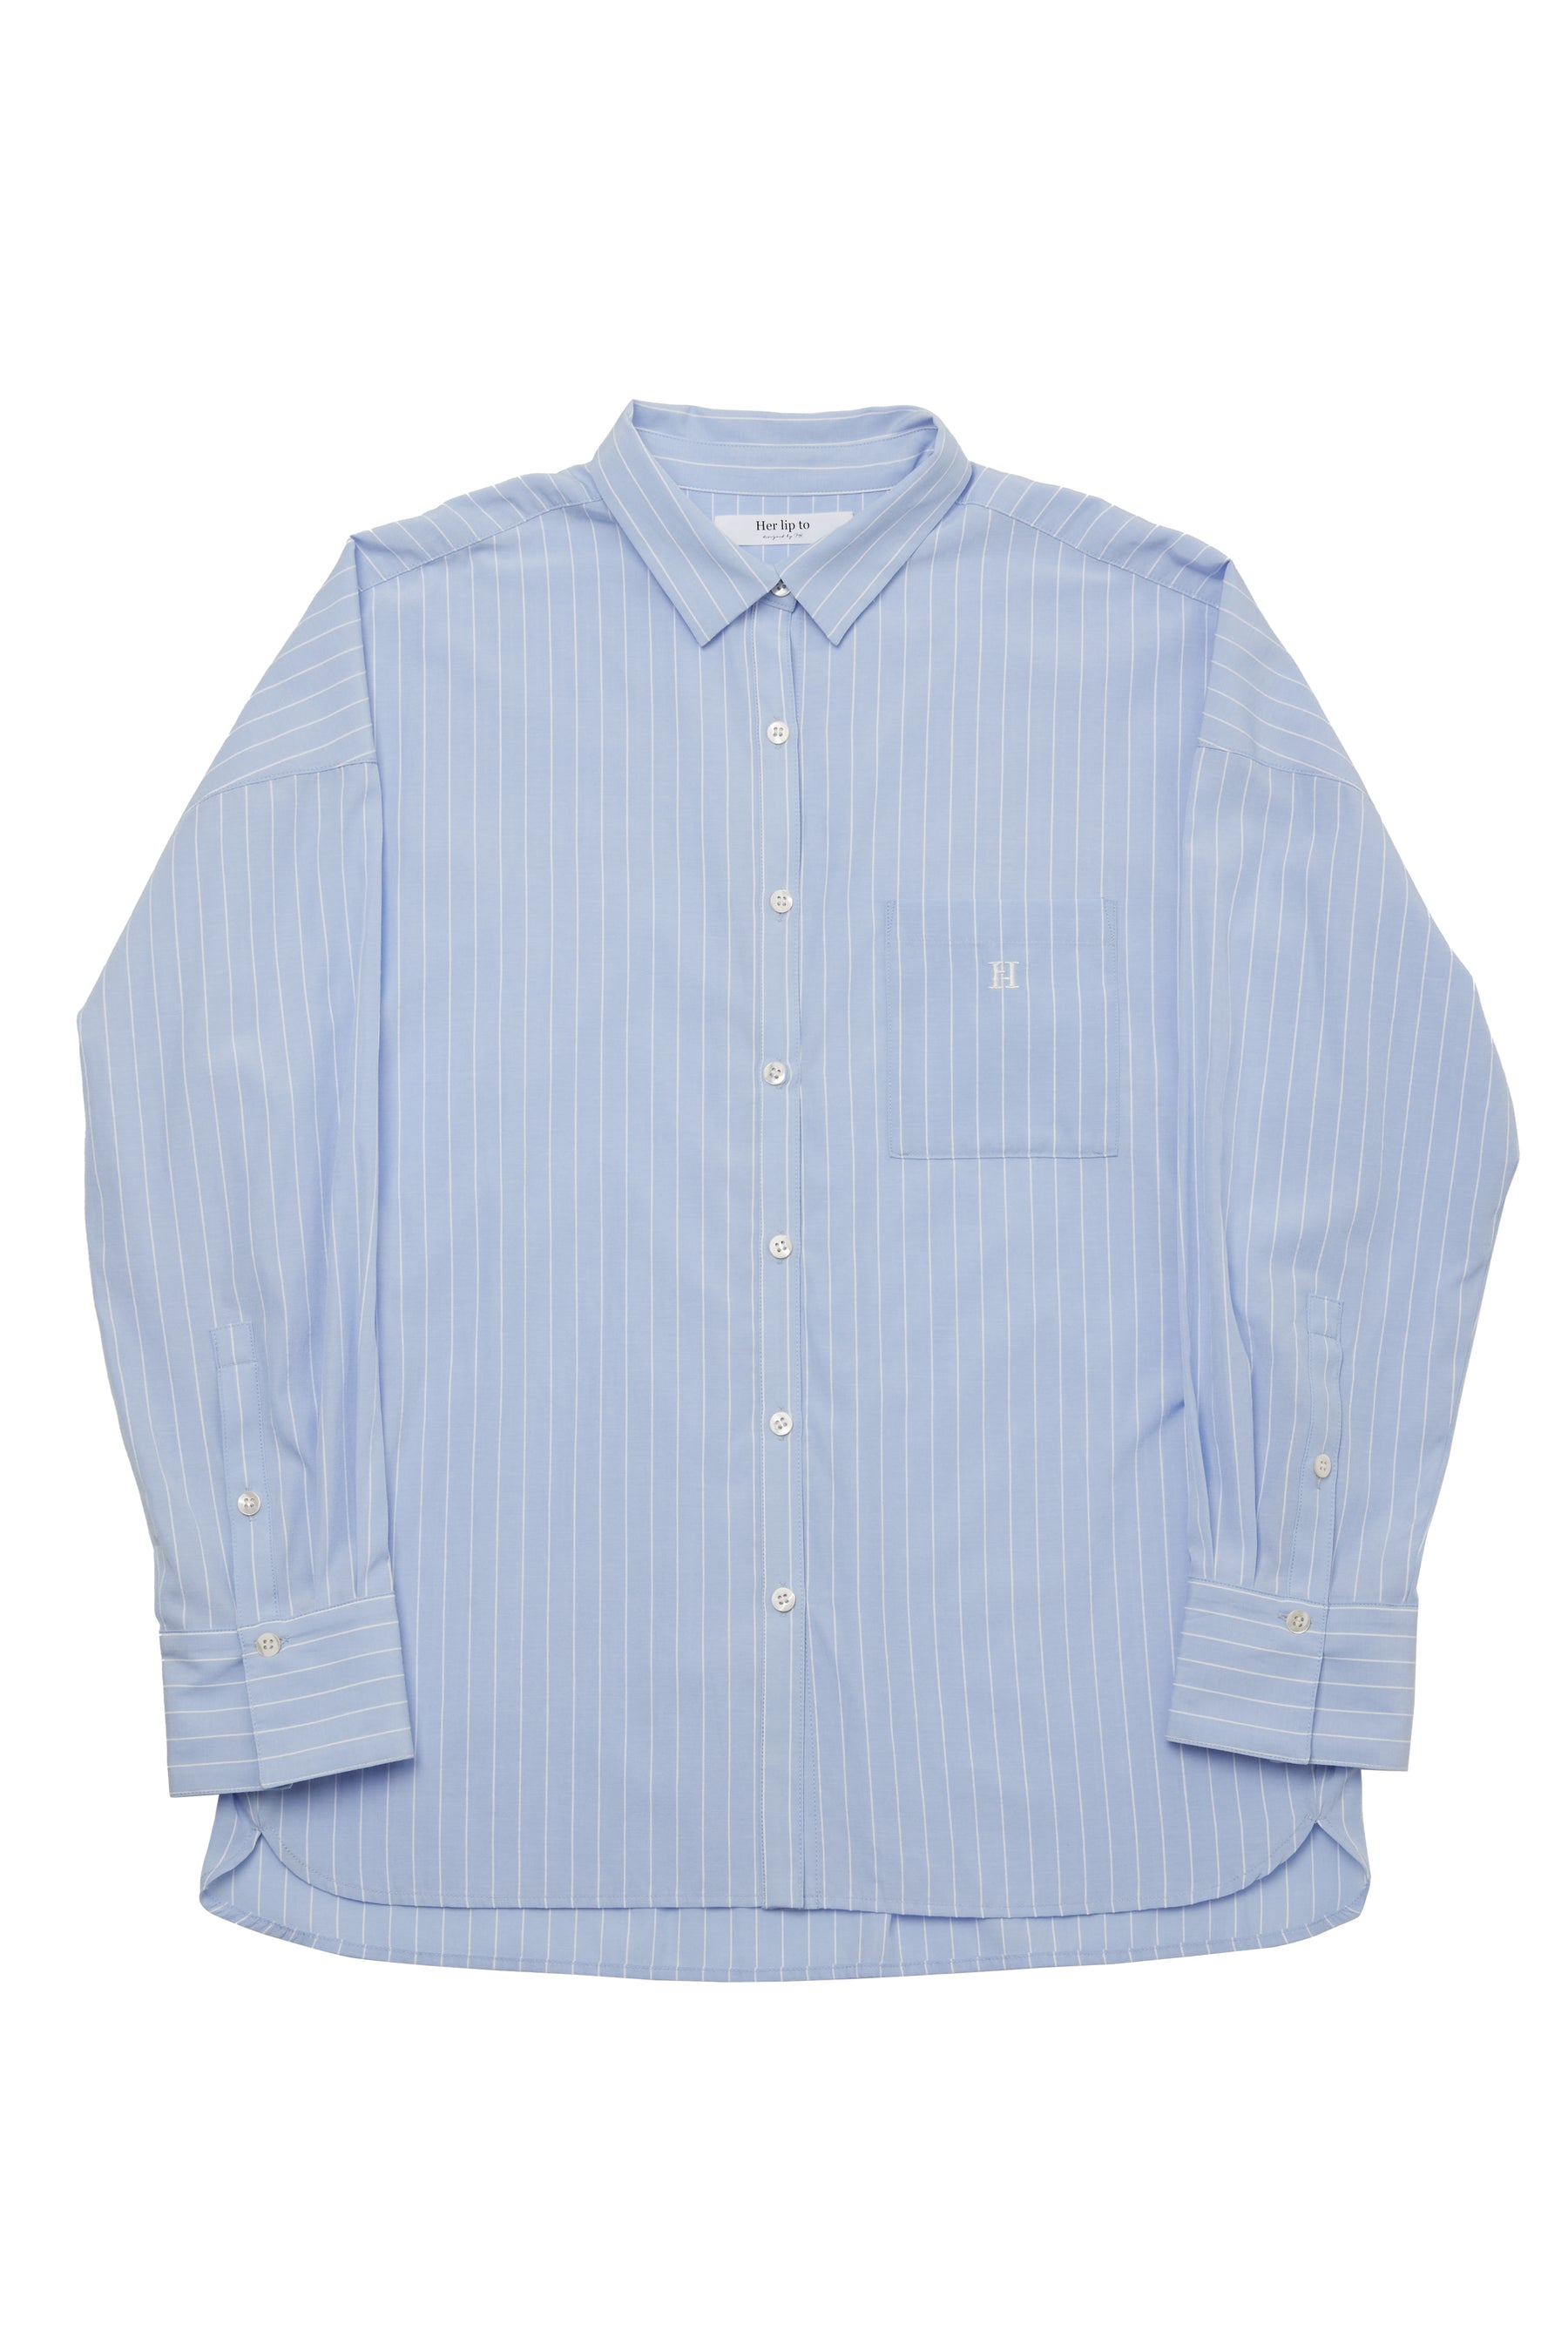 Have It All Stripe Shirt